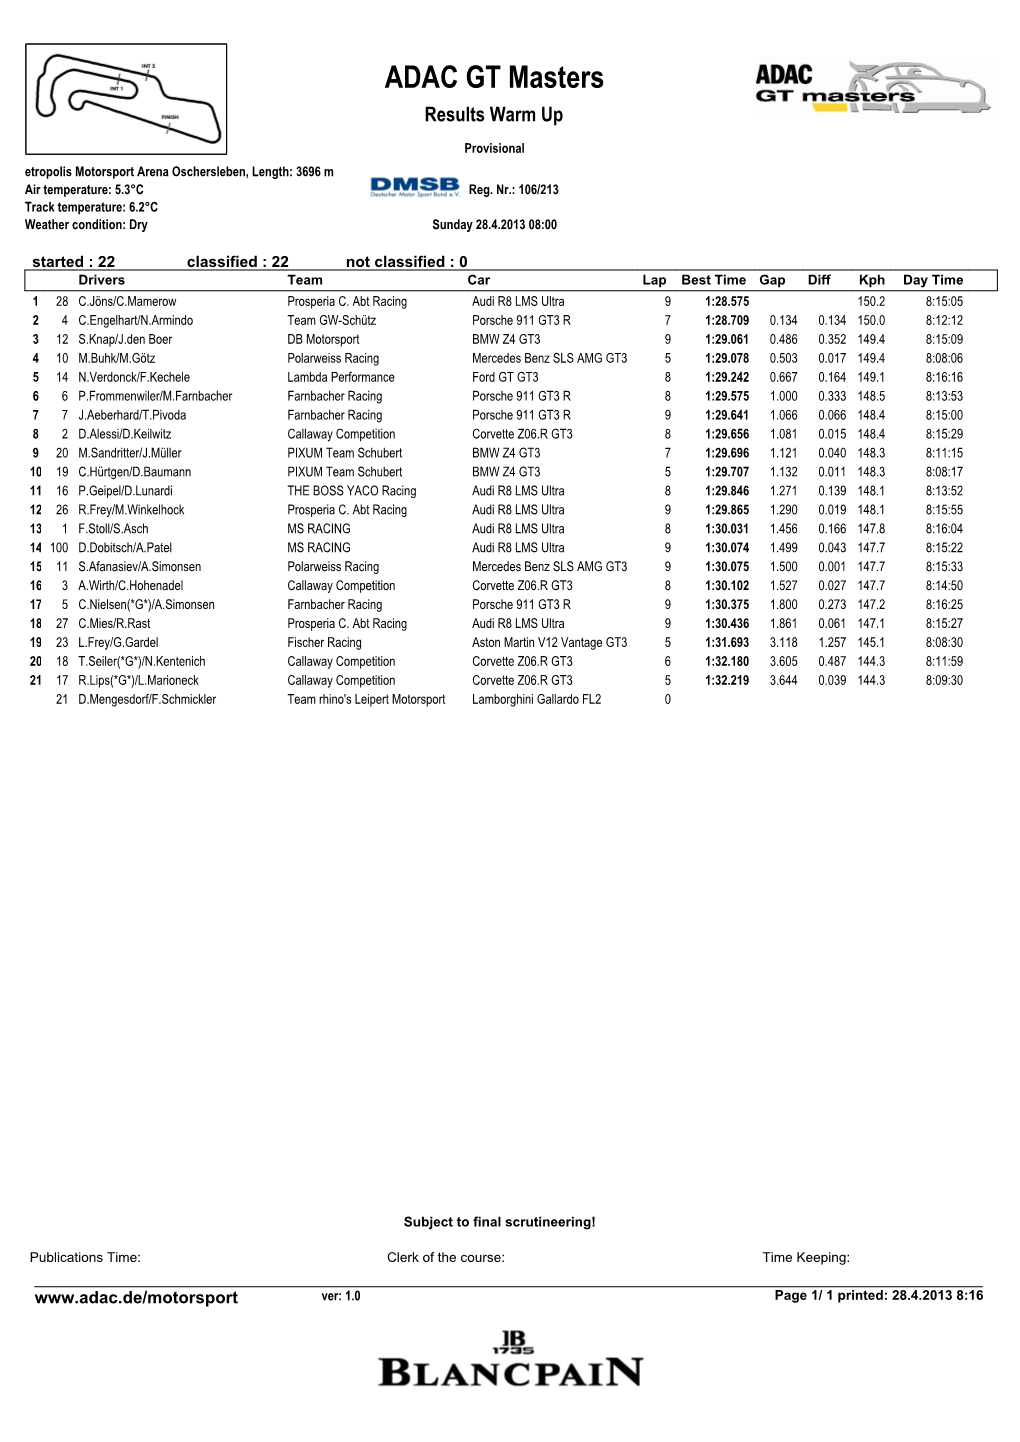 ADAC GT Masters Results Warm Up